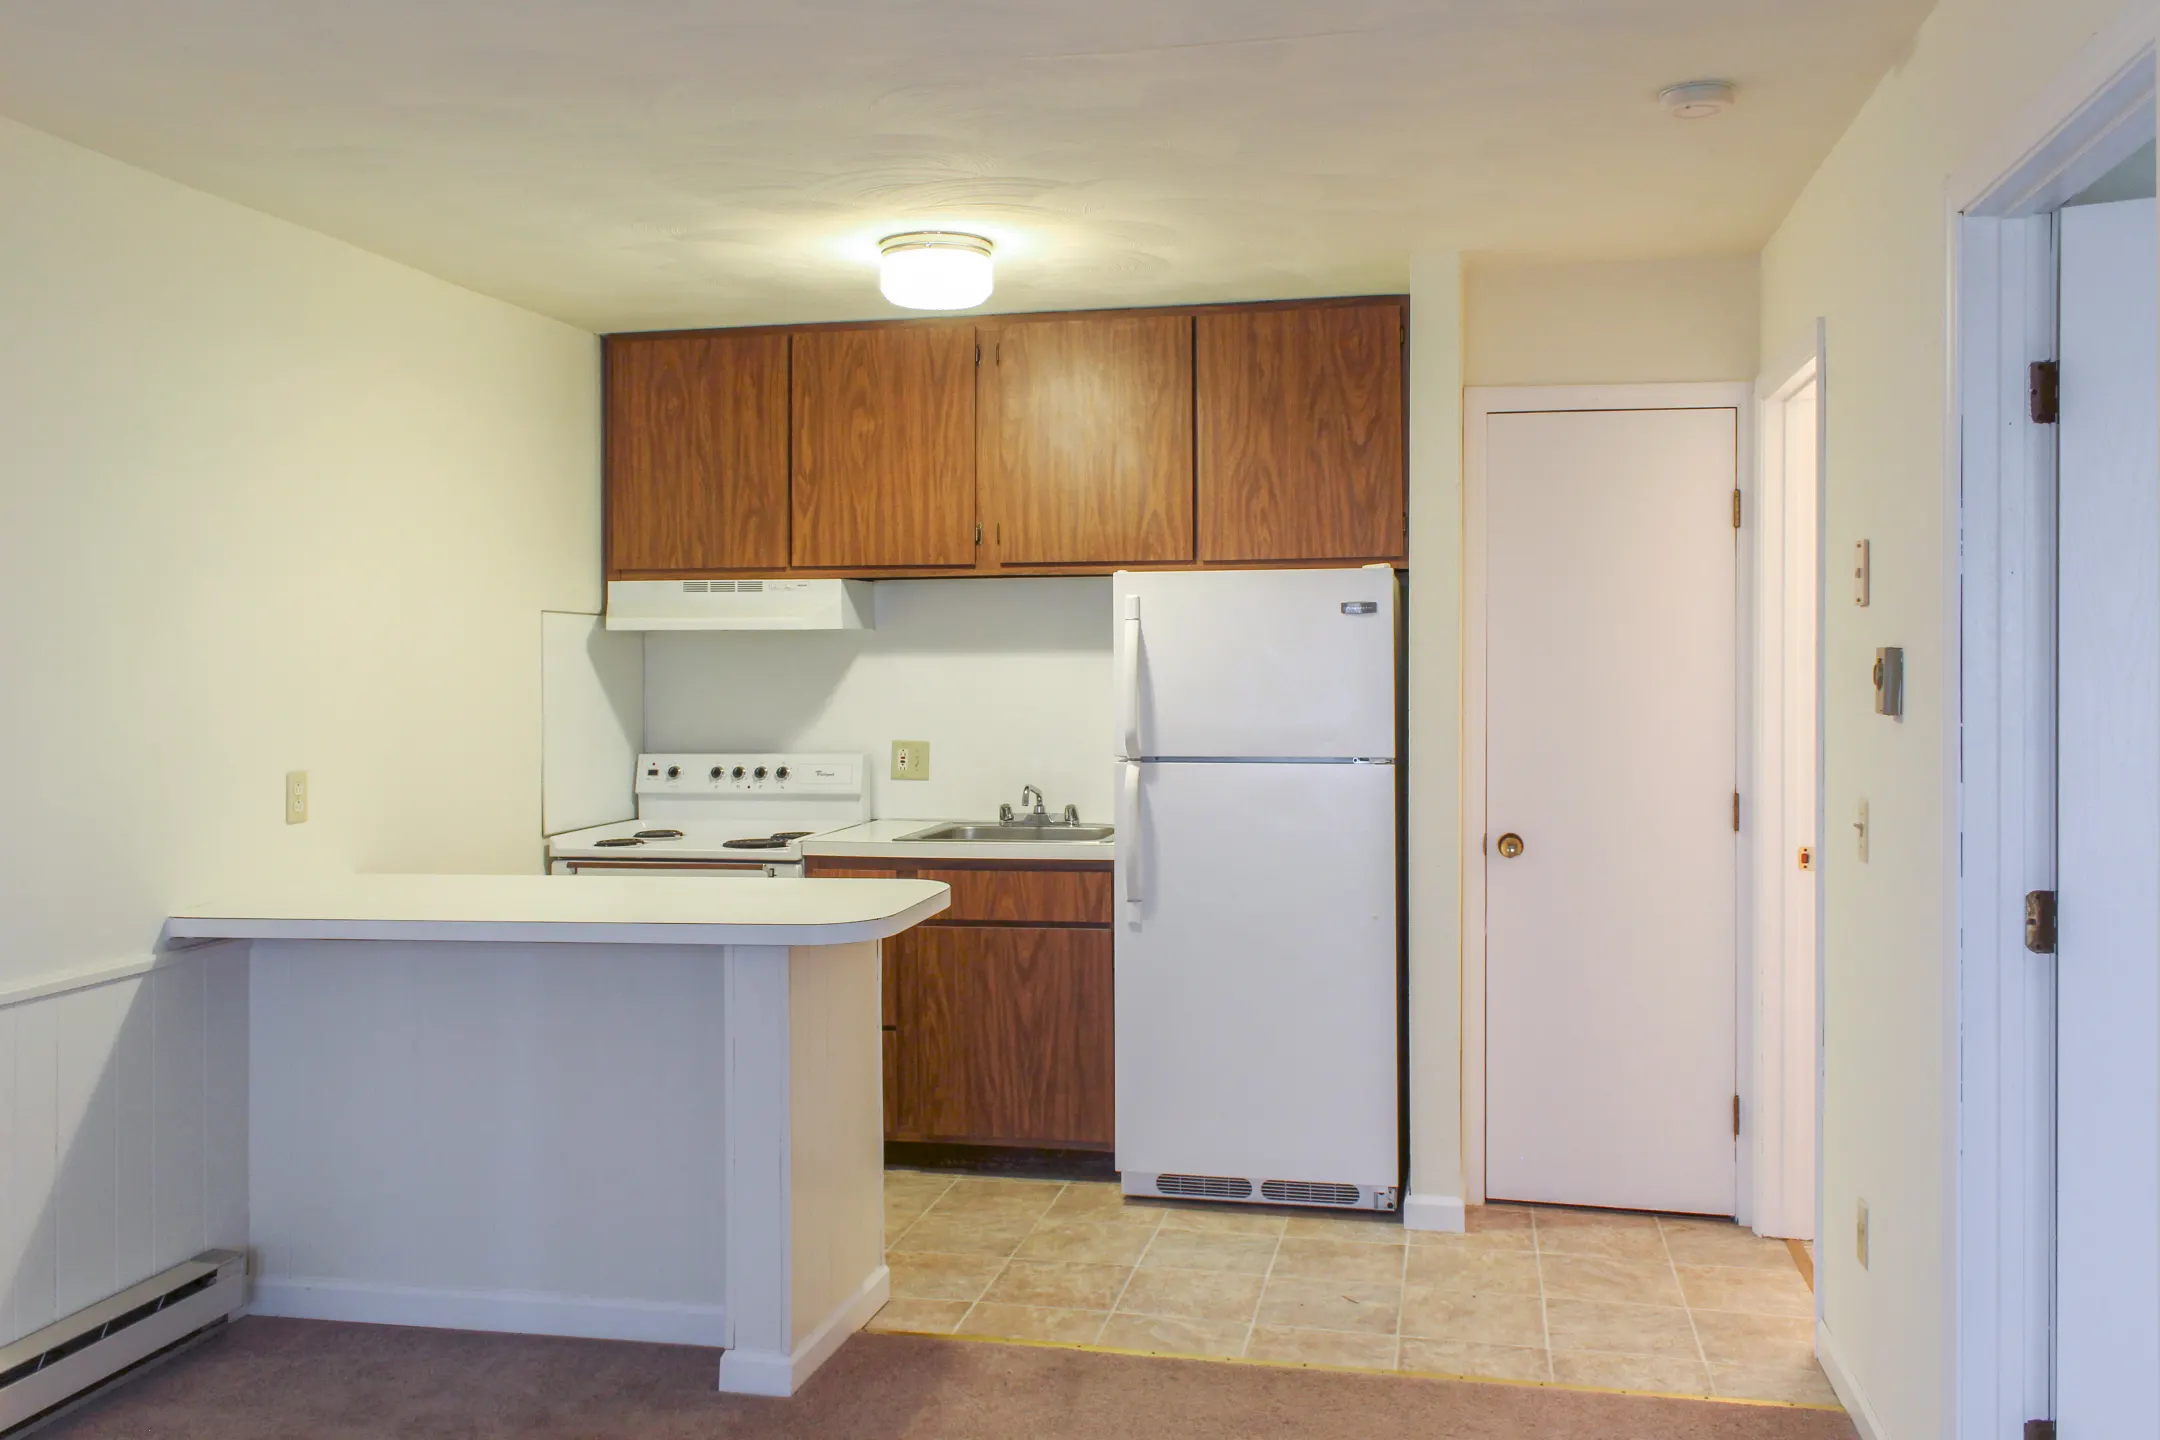 Kitchen - Oak Hill Apartments - Maumee, OH